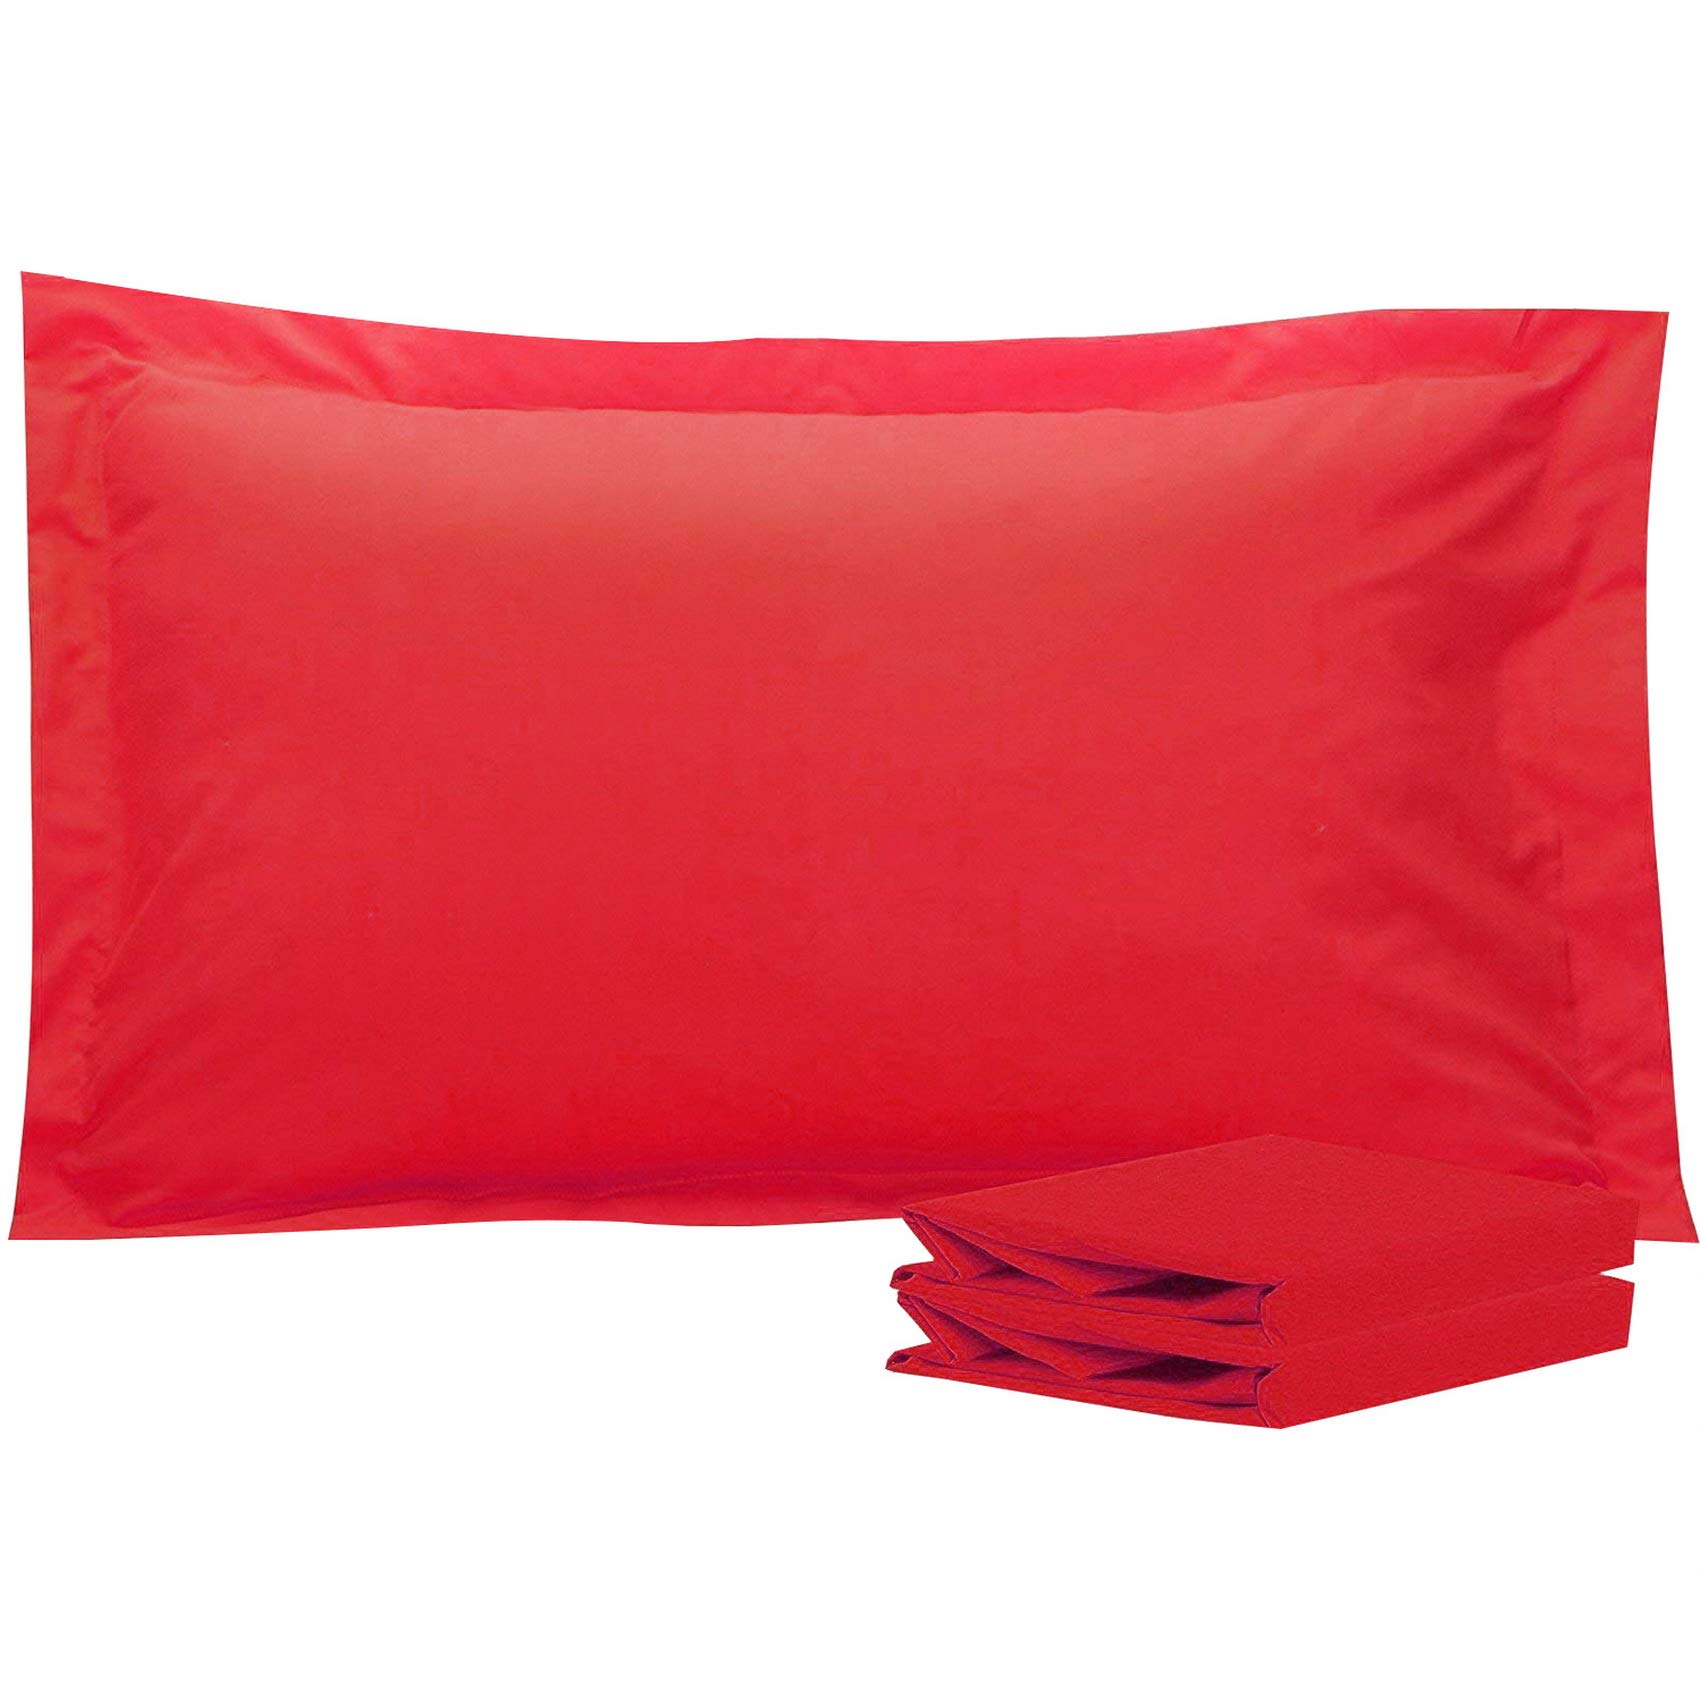 Book Cover NTBAY Queen Pillow Shams, Set of 2, 100% Brushed Microfiber, Soft and Cozy, Wrinkle, Fade, Stain Resistant (Red, Queen)